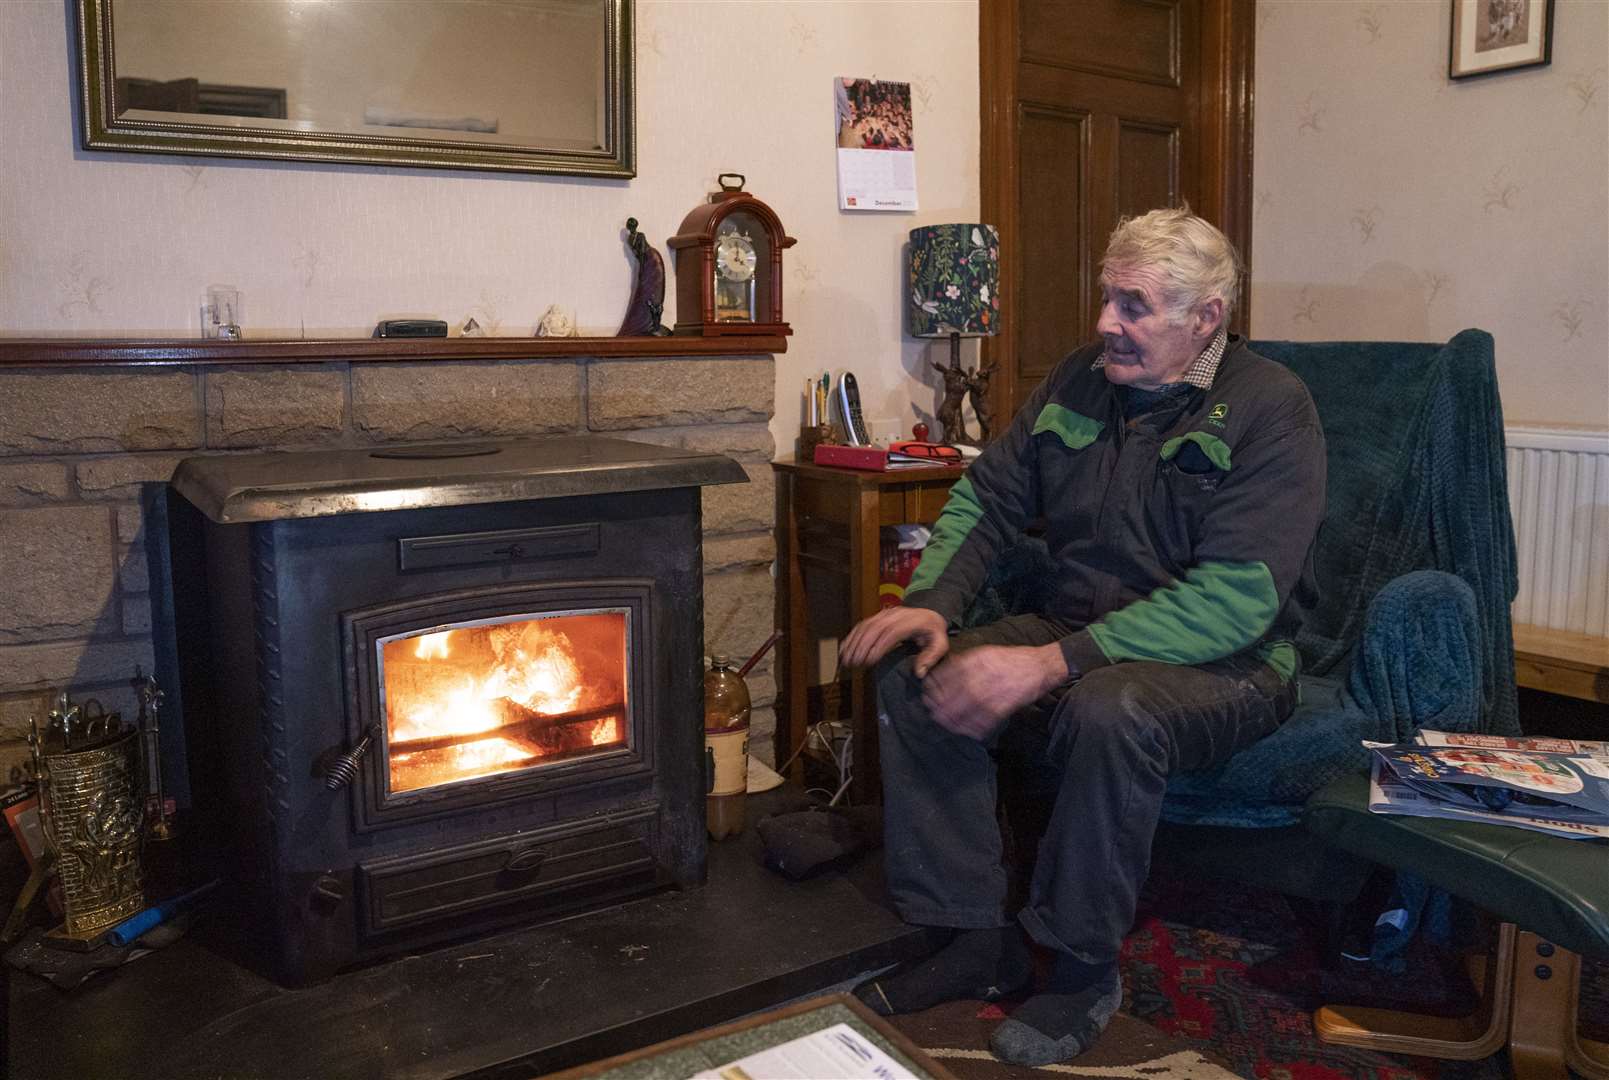 Jim Muir (pictured) and his wife Belinda, who live at Honeyneuk Farm, Maud, Aberdeenshire, were without power for several days but have since been reconnected (Jane Barlow/PA)